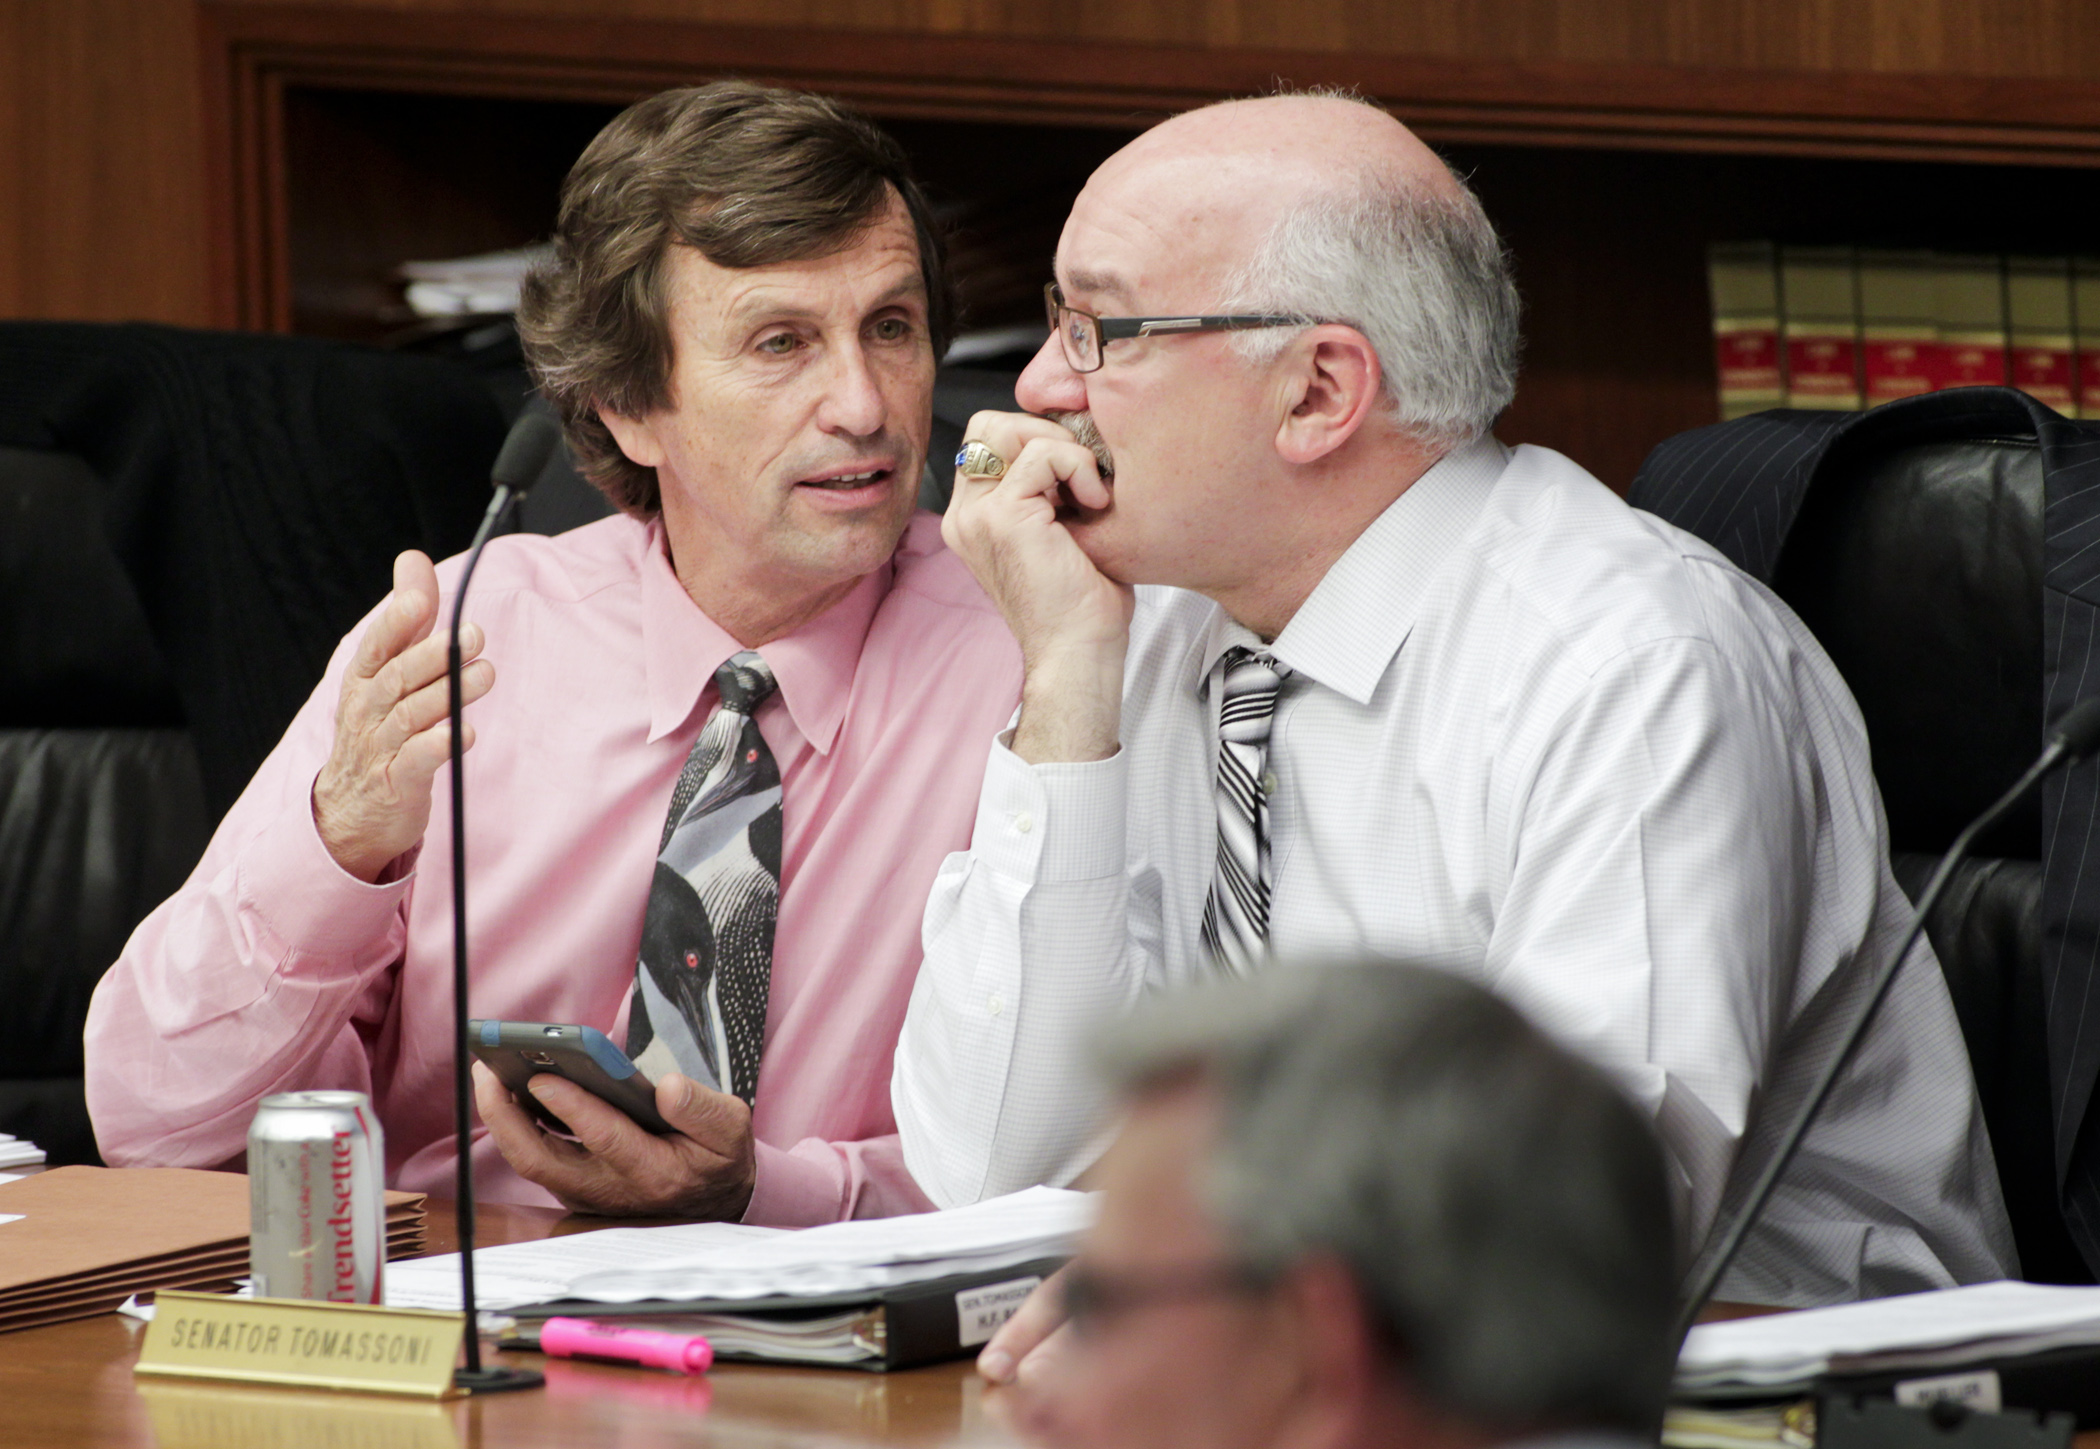 Rep. Denny McNamara, left, and Sen. David Tomassoni confer before the start of the conference committee on the omnibus environment, natural resources and agriculture policy and finance bill May 16. Photo by Paul Battaglia